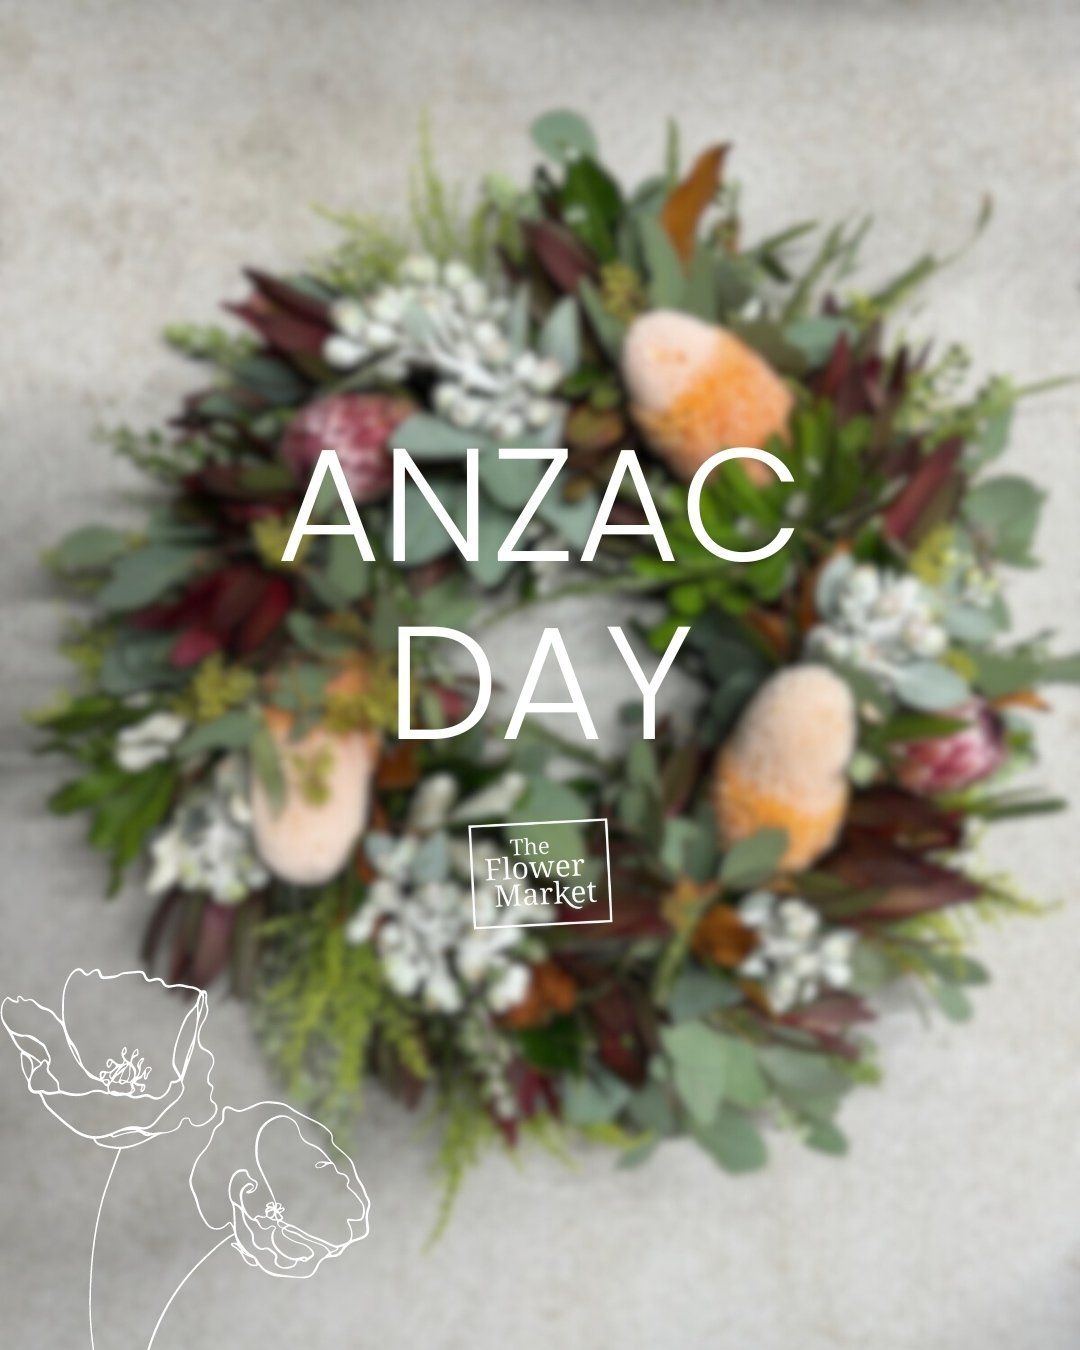 On this ANZAC Day, we pay tribute to the brave soldiers who fought for our freedom and made the ultimate sacrifice. Lest we forget. ❤️

We are open today from 7am - 8pm.

#ANZACDay #LestWeForget